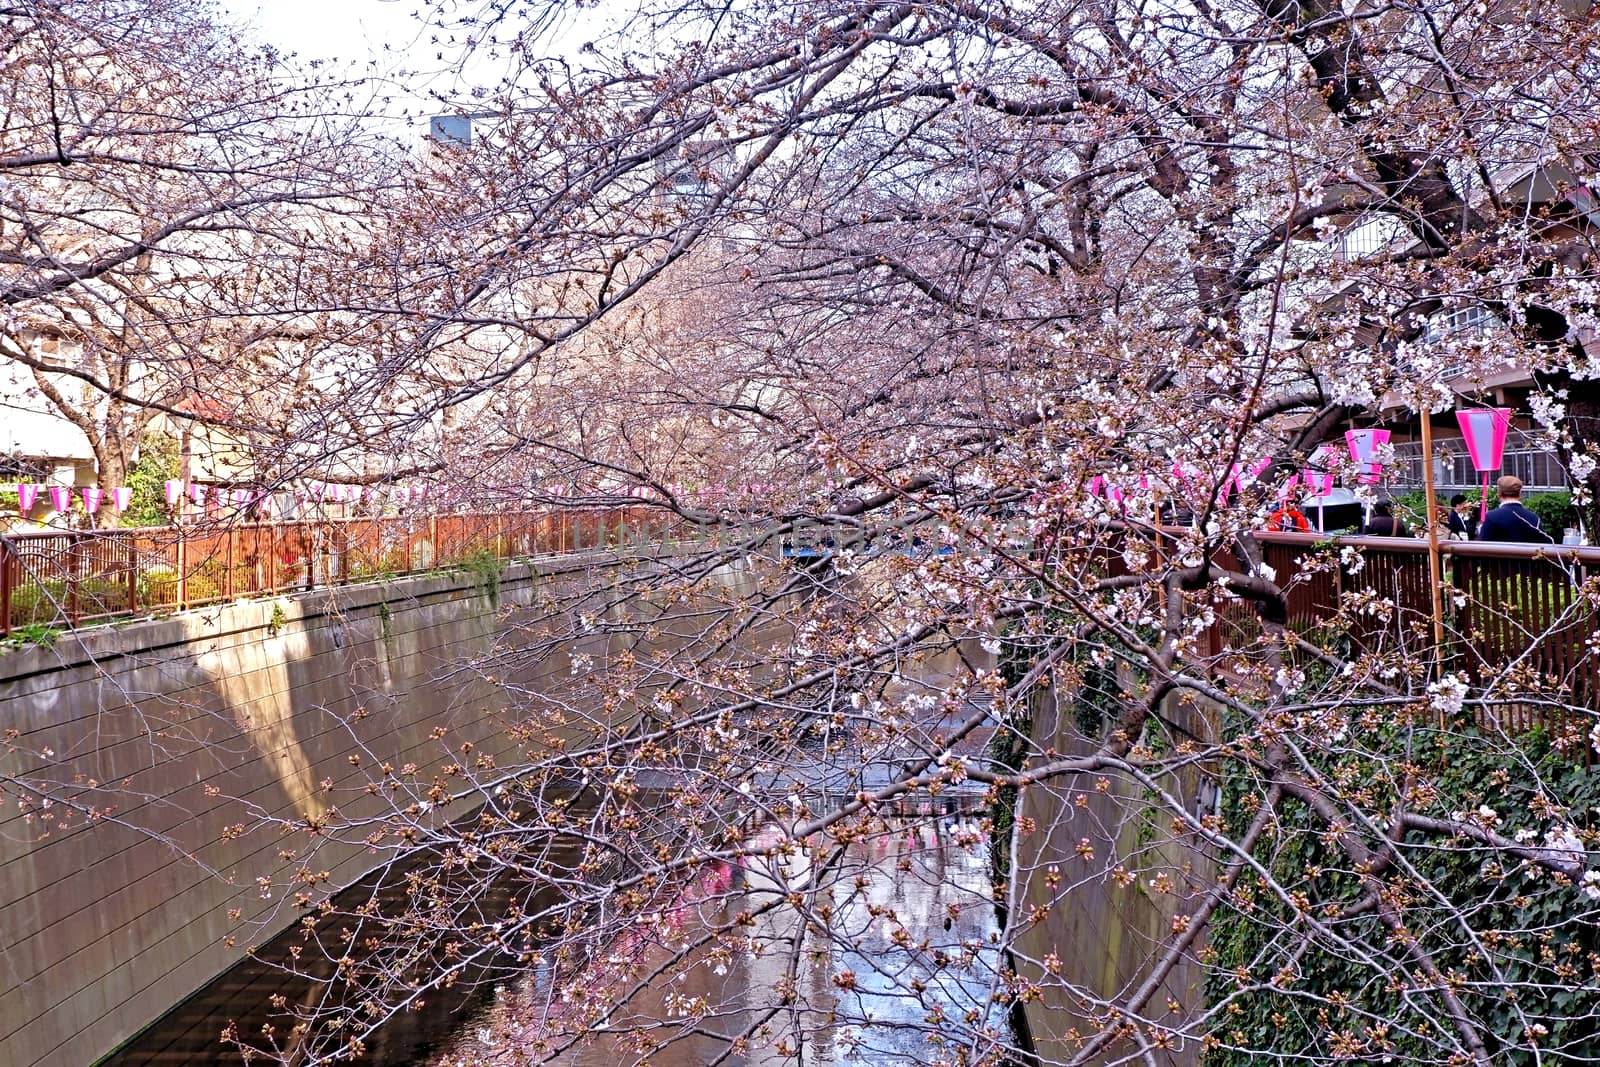 City river, sakura cherry blossom flowers, traditional lamp and  by cougarsan